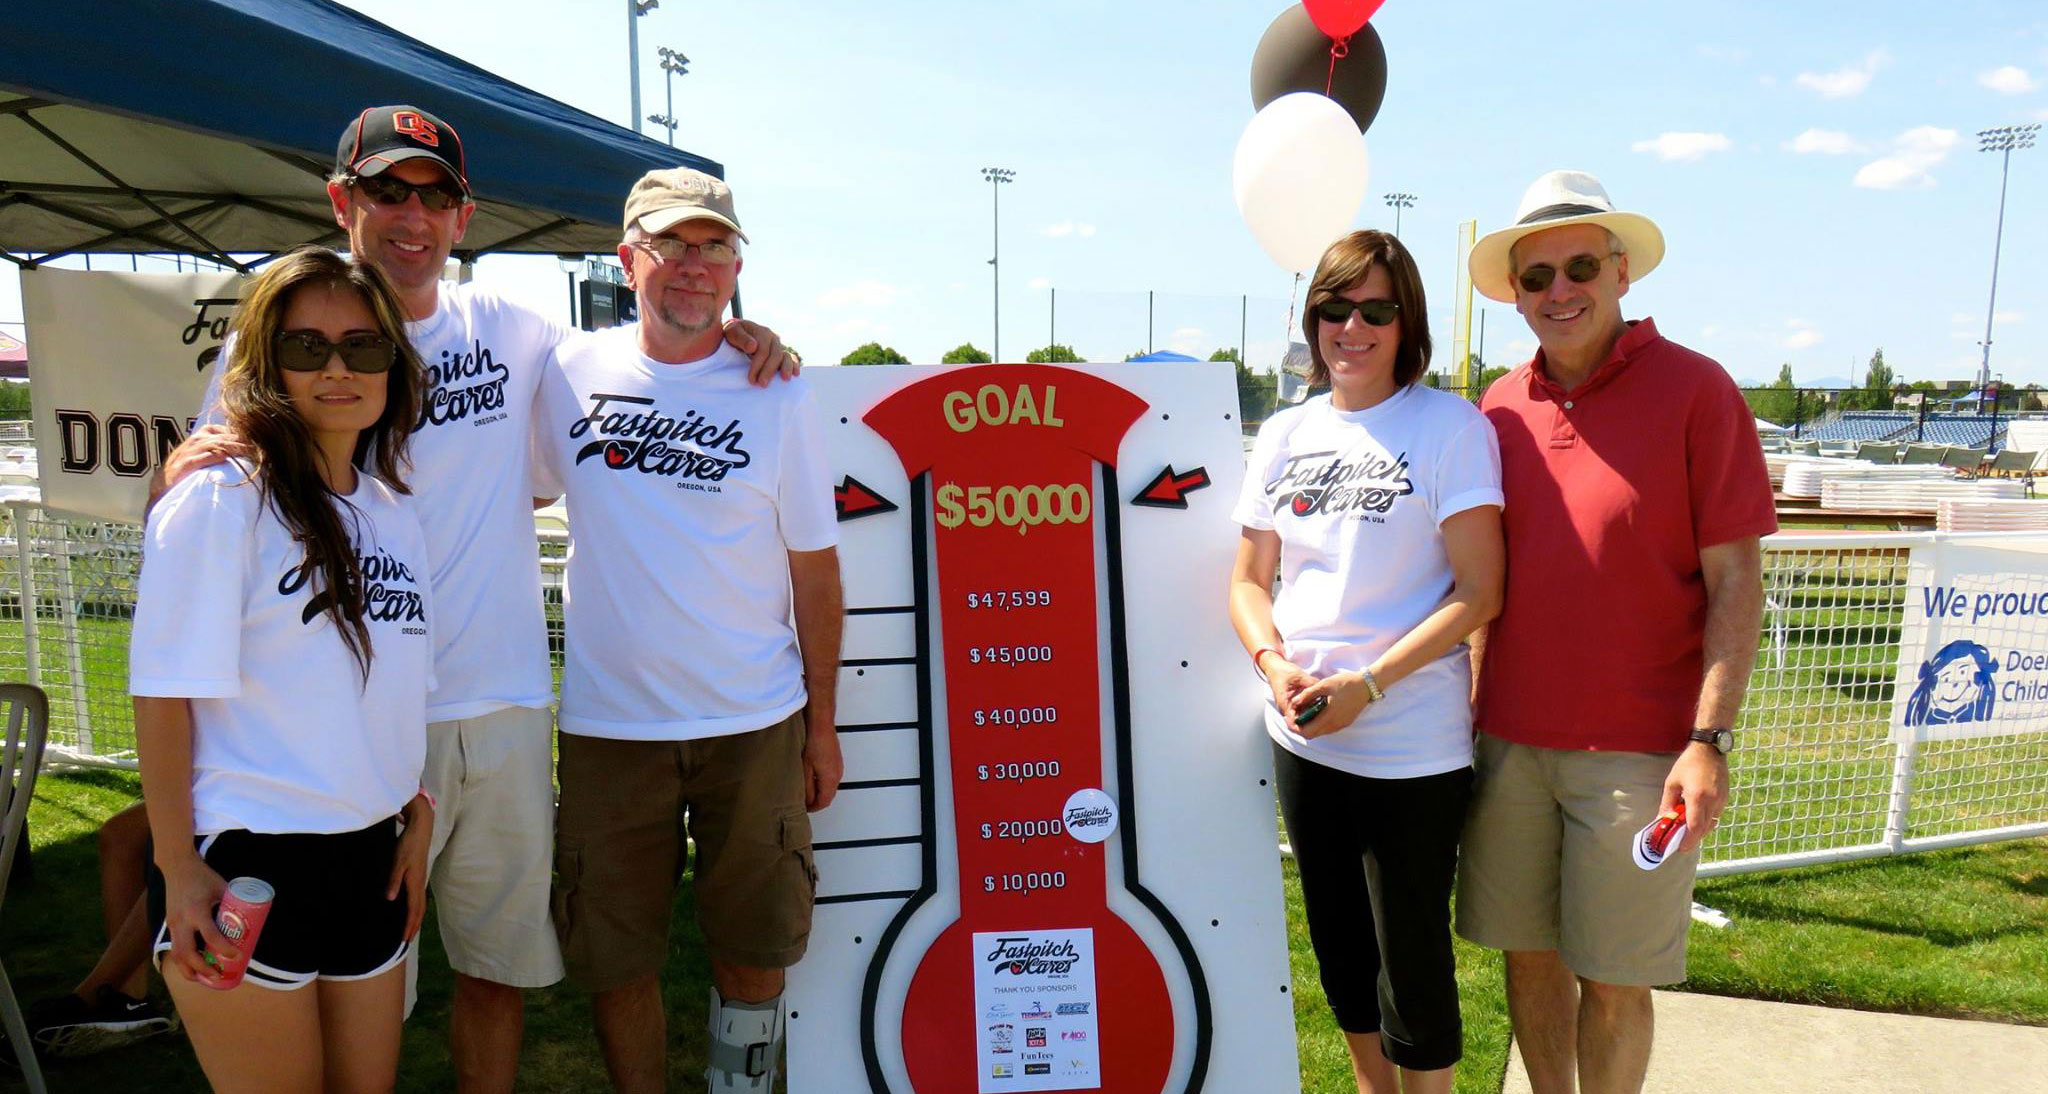 Fastpitch Cares team next to a fundraising goal sign